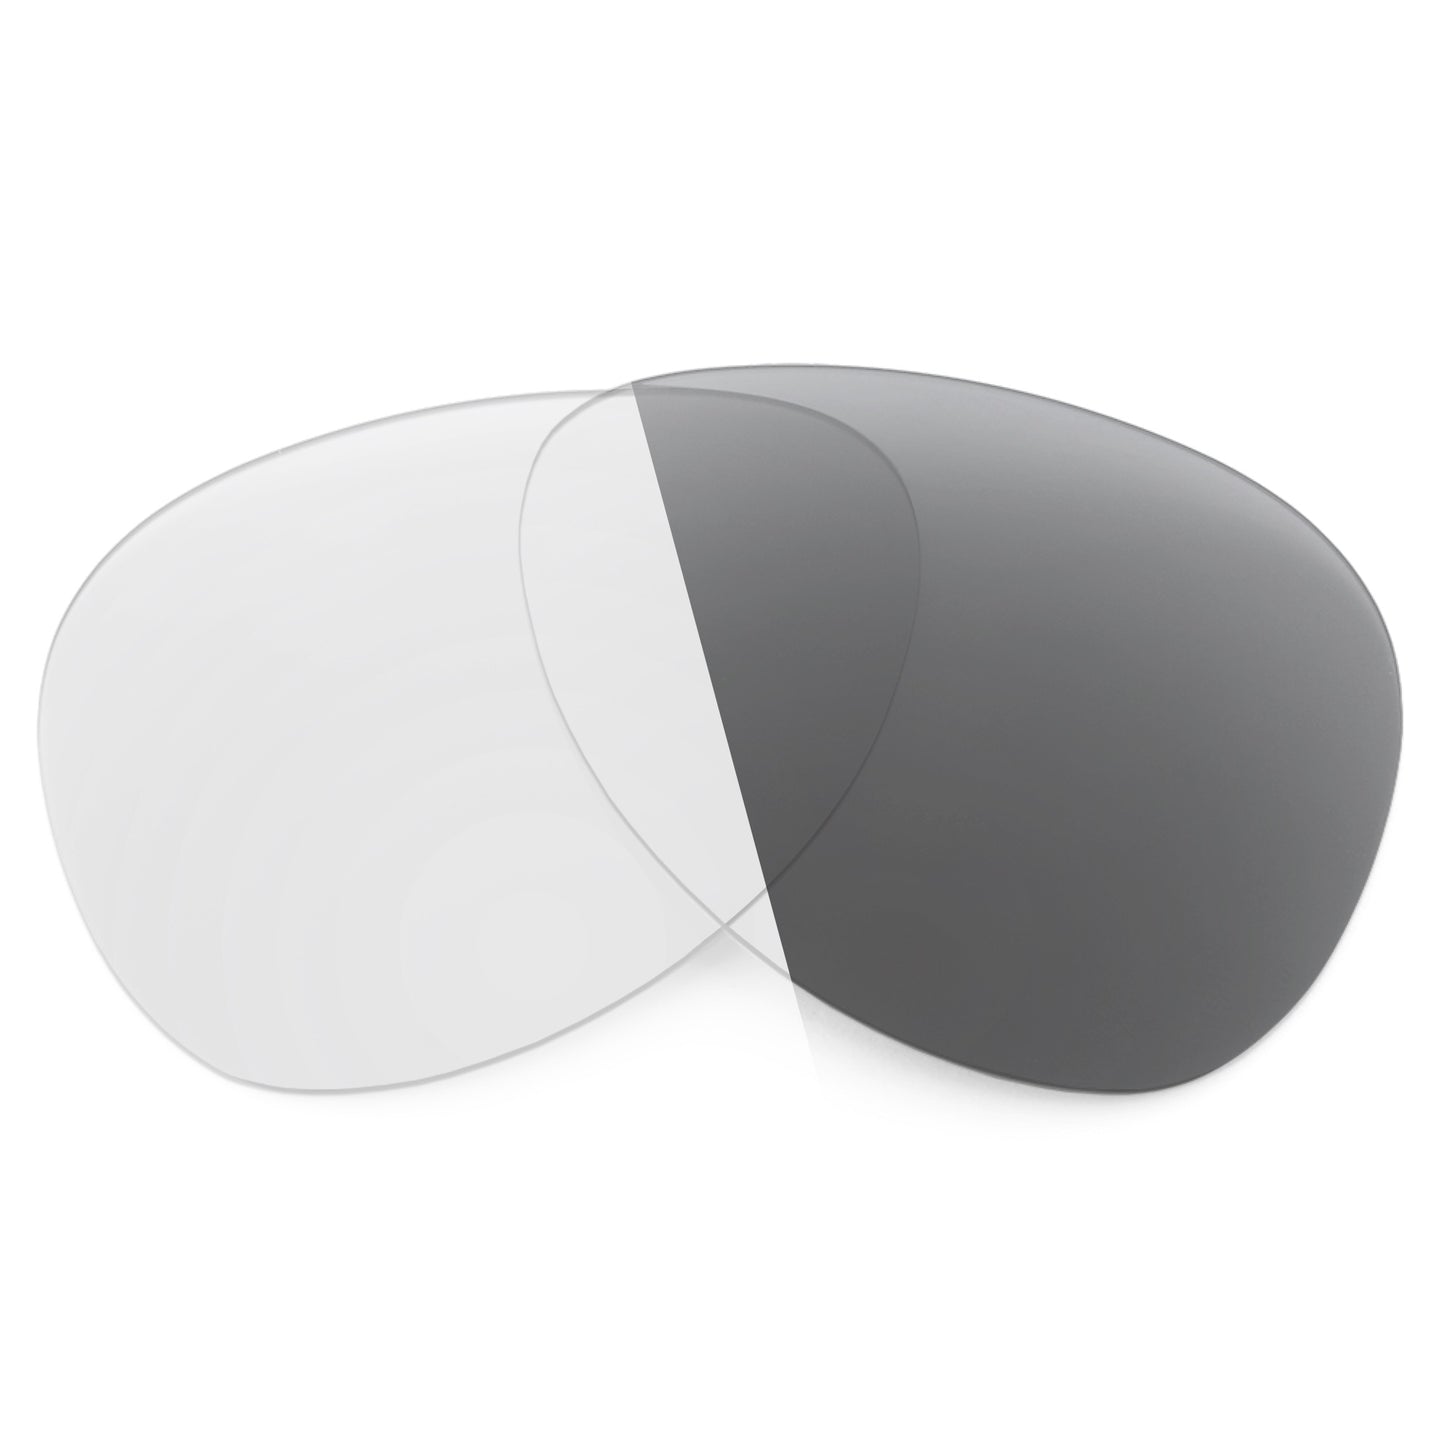 Revant replacement lenses for Ray-Ban Alex RB4201 59mm Non-Polarized Adapt Gray Photochromic